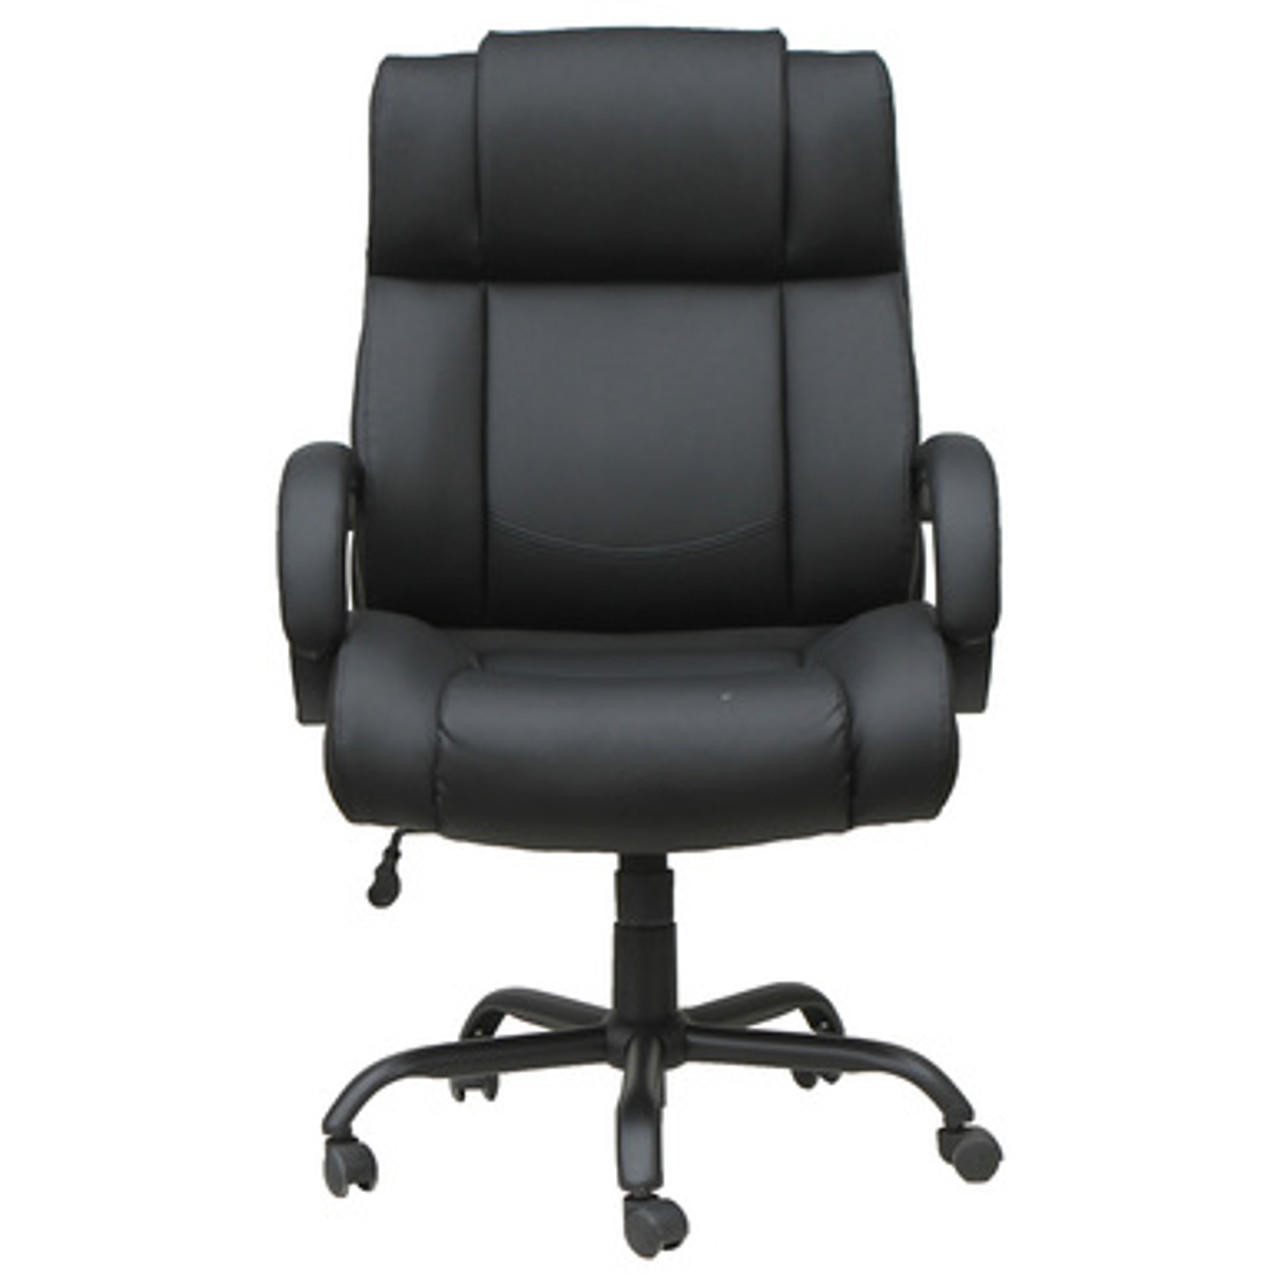 https://cdn11.bigcommerce.com/s-i16nt17fuj/images/stencil/1280x1280/products/10270/42543/office-source-big-and-tall-collection-heavy-duty-high-back-executive-chair-11667l__86020.1702830198.jpg?c=2